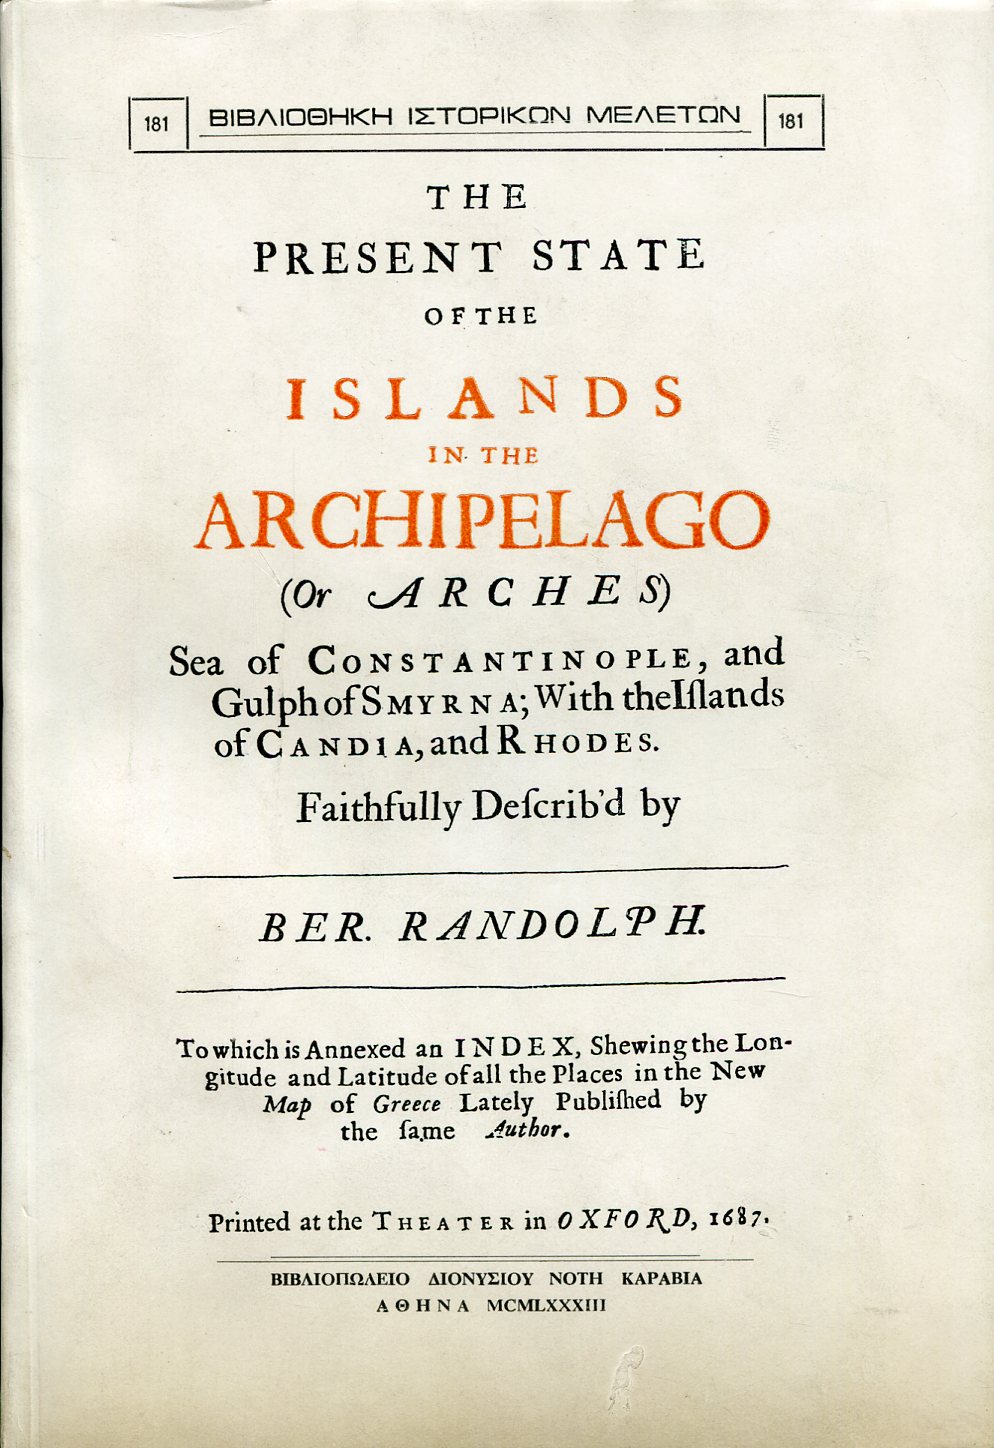 THE PRESENT STATE OF THE ISLANDS IN THE ARCHIPELAGO (OR ARCHES)